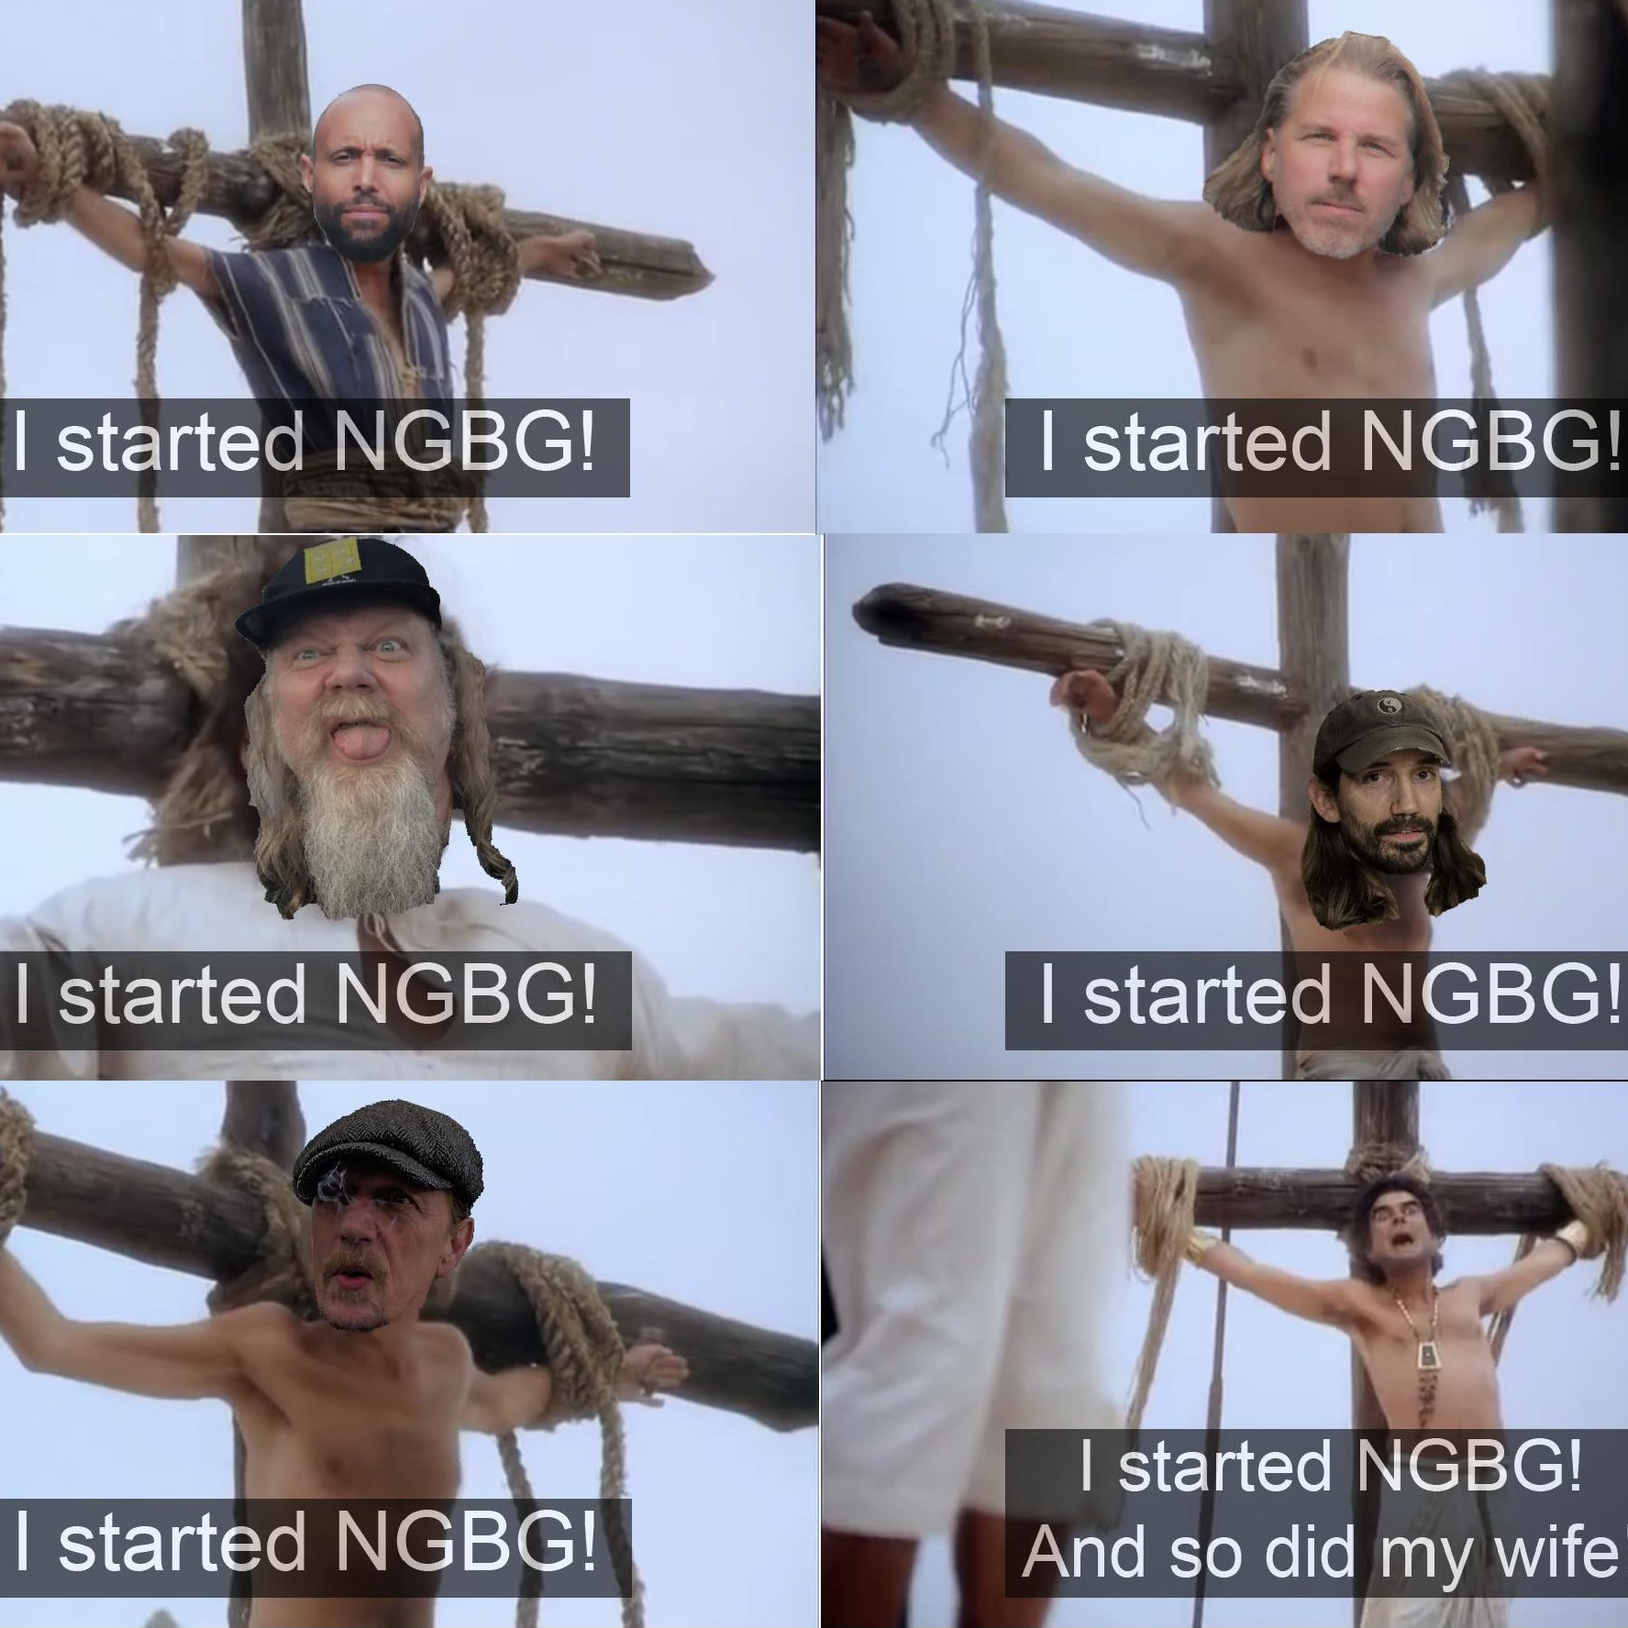 Who really started NGBG?